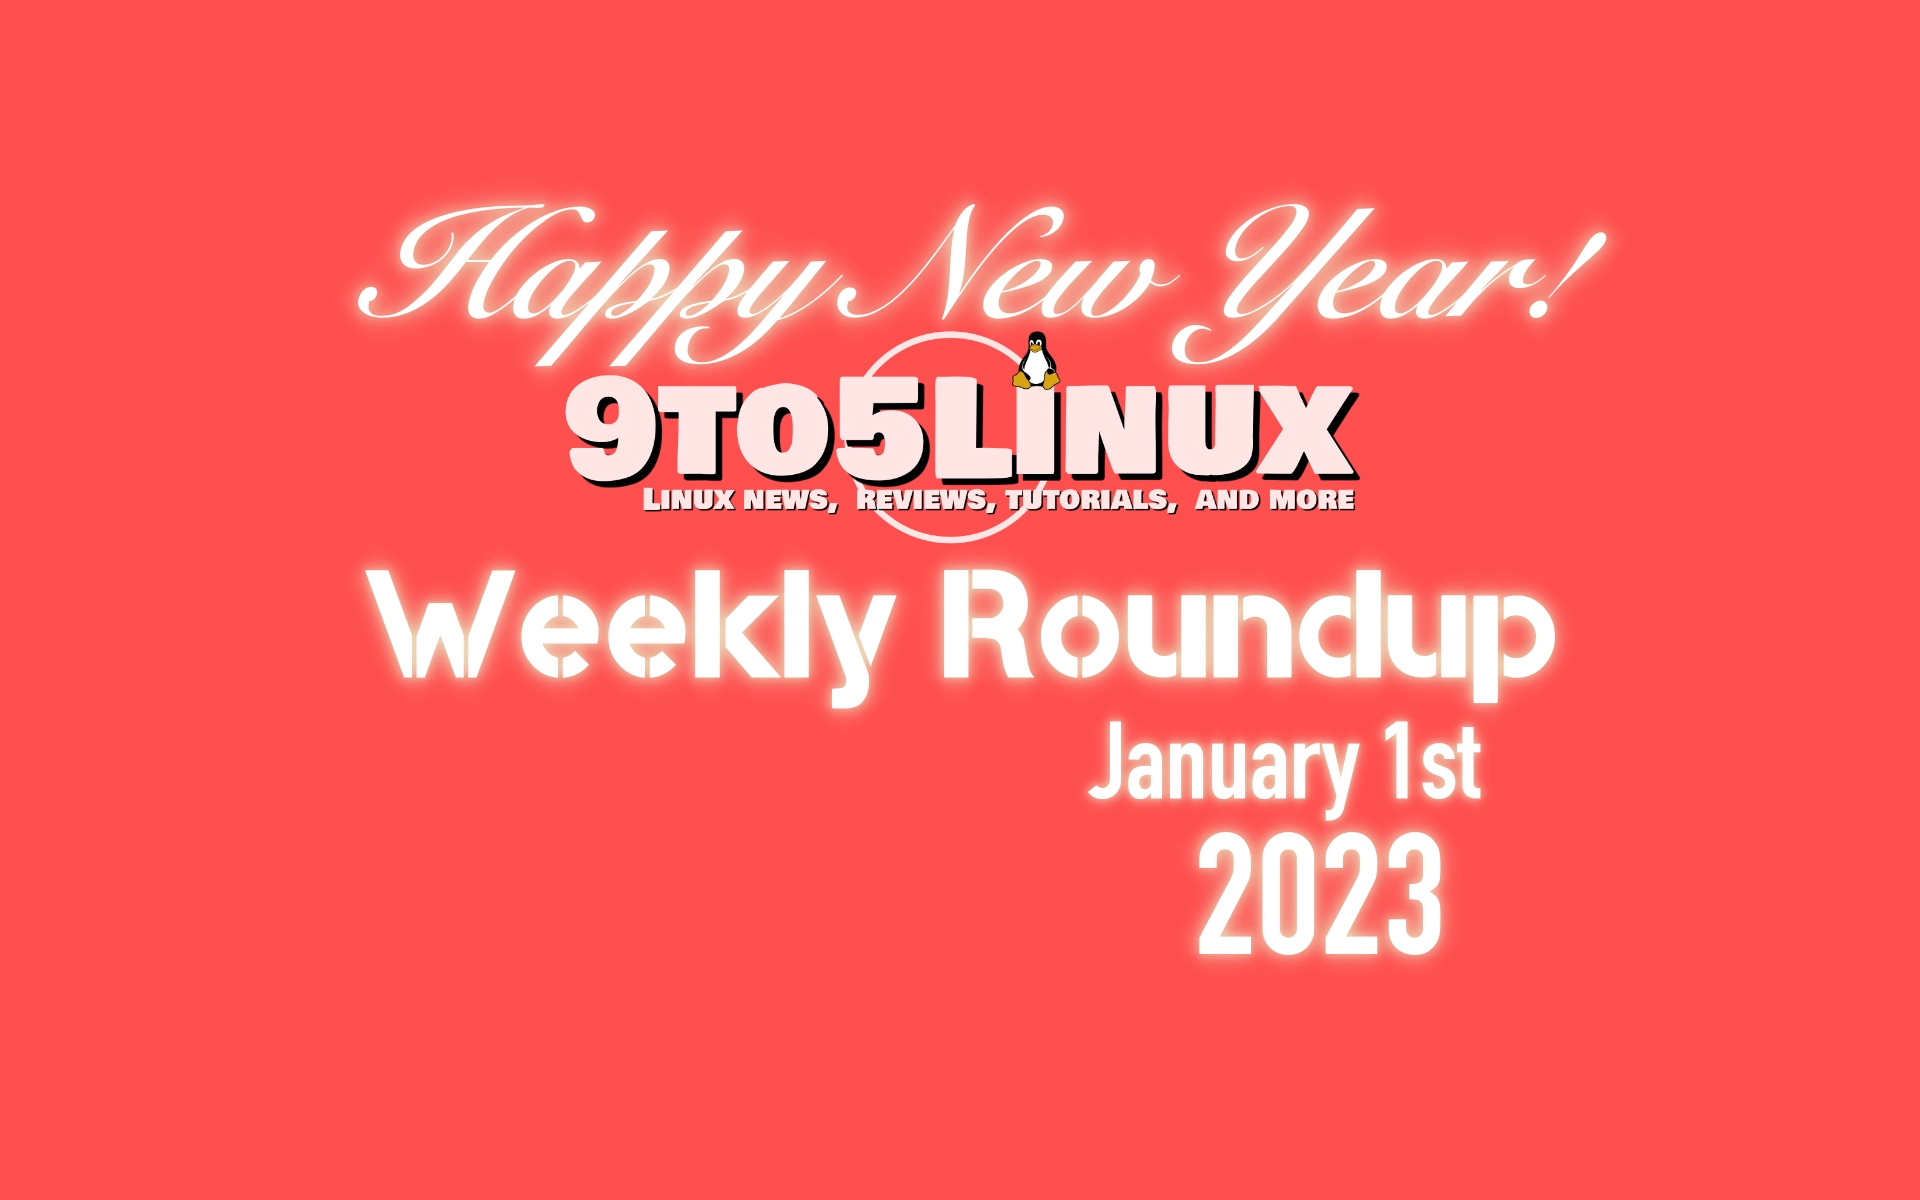 9to5Linux Weekly Roundup: January 1st, 2023 “Happy New Year!”